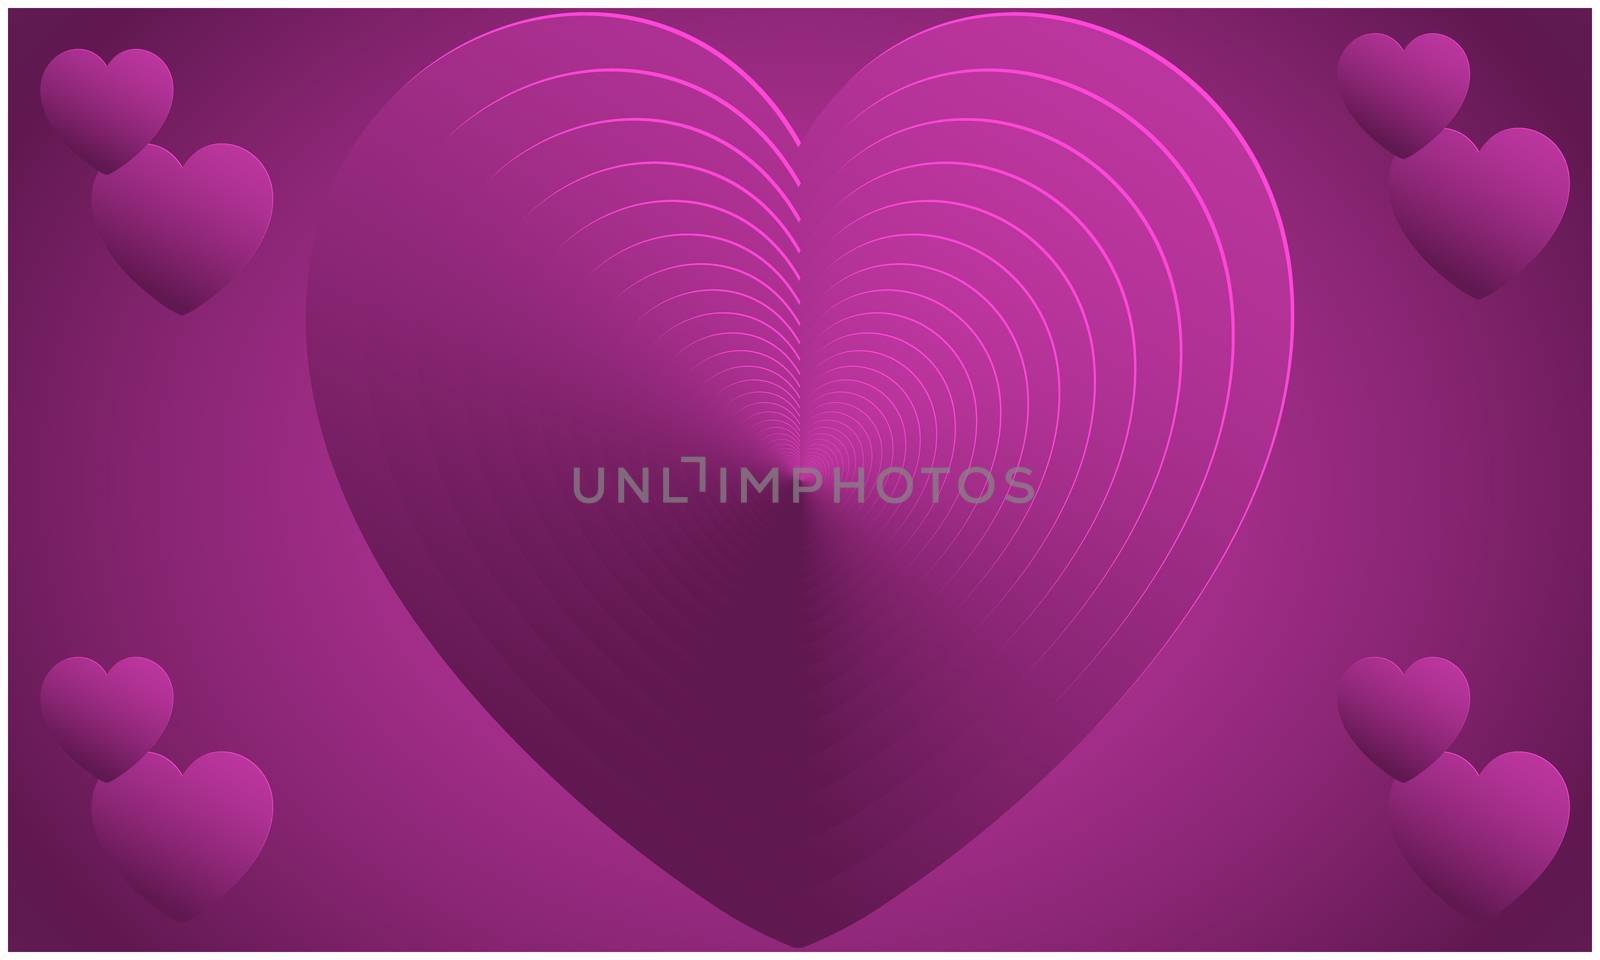 Abstract Design of heart on valentine backgrounds